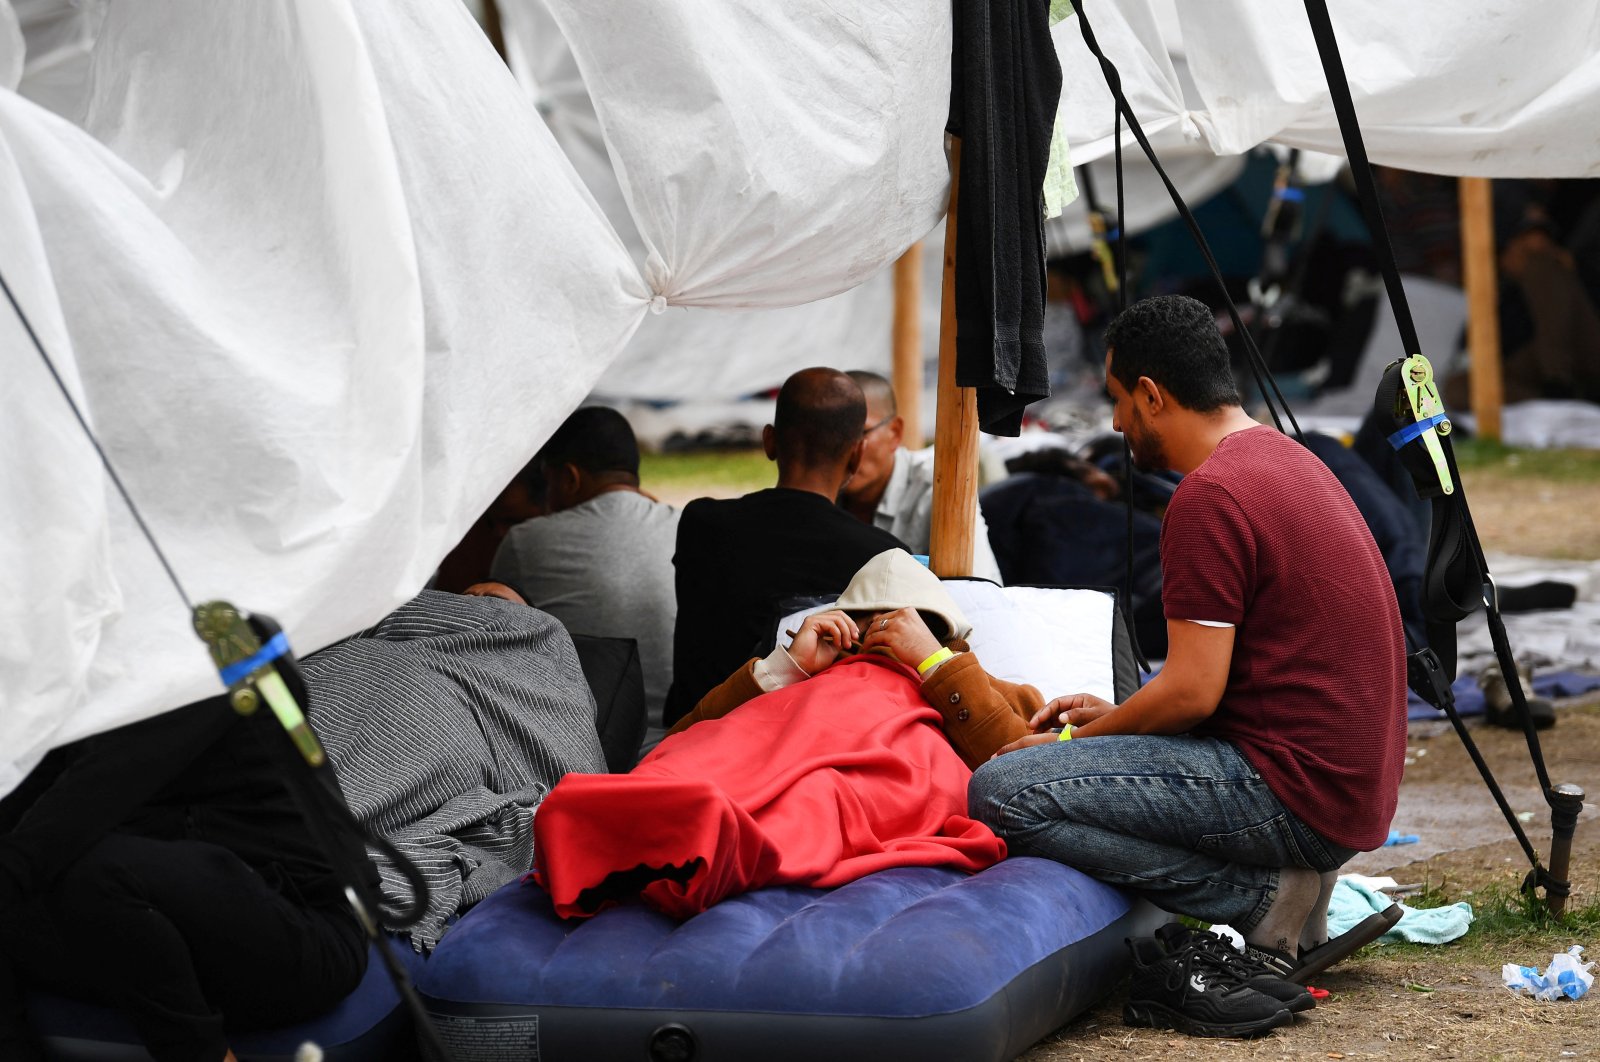 Refugees wait outside at the main reception centre for asylum seekers, in Ter Apel, Netherlands, Aug. 26, 2022. (Reuters Photo)